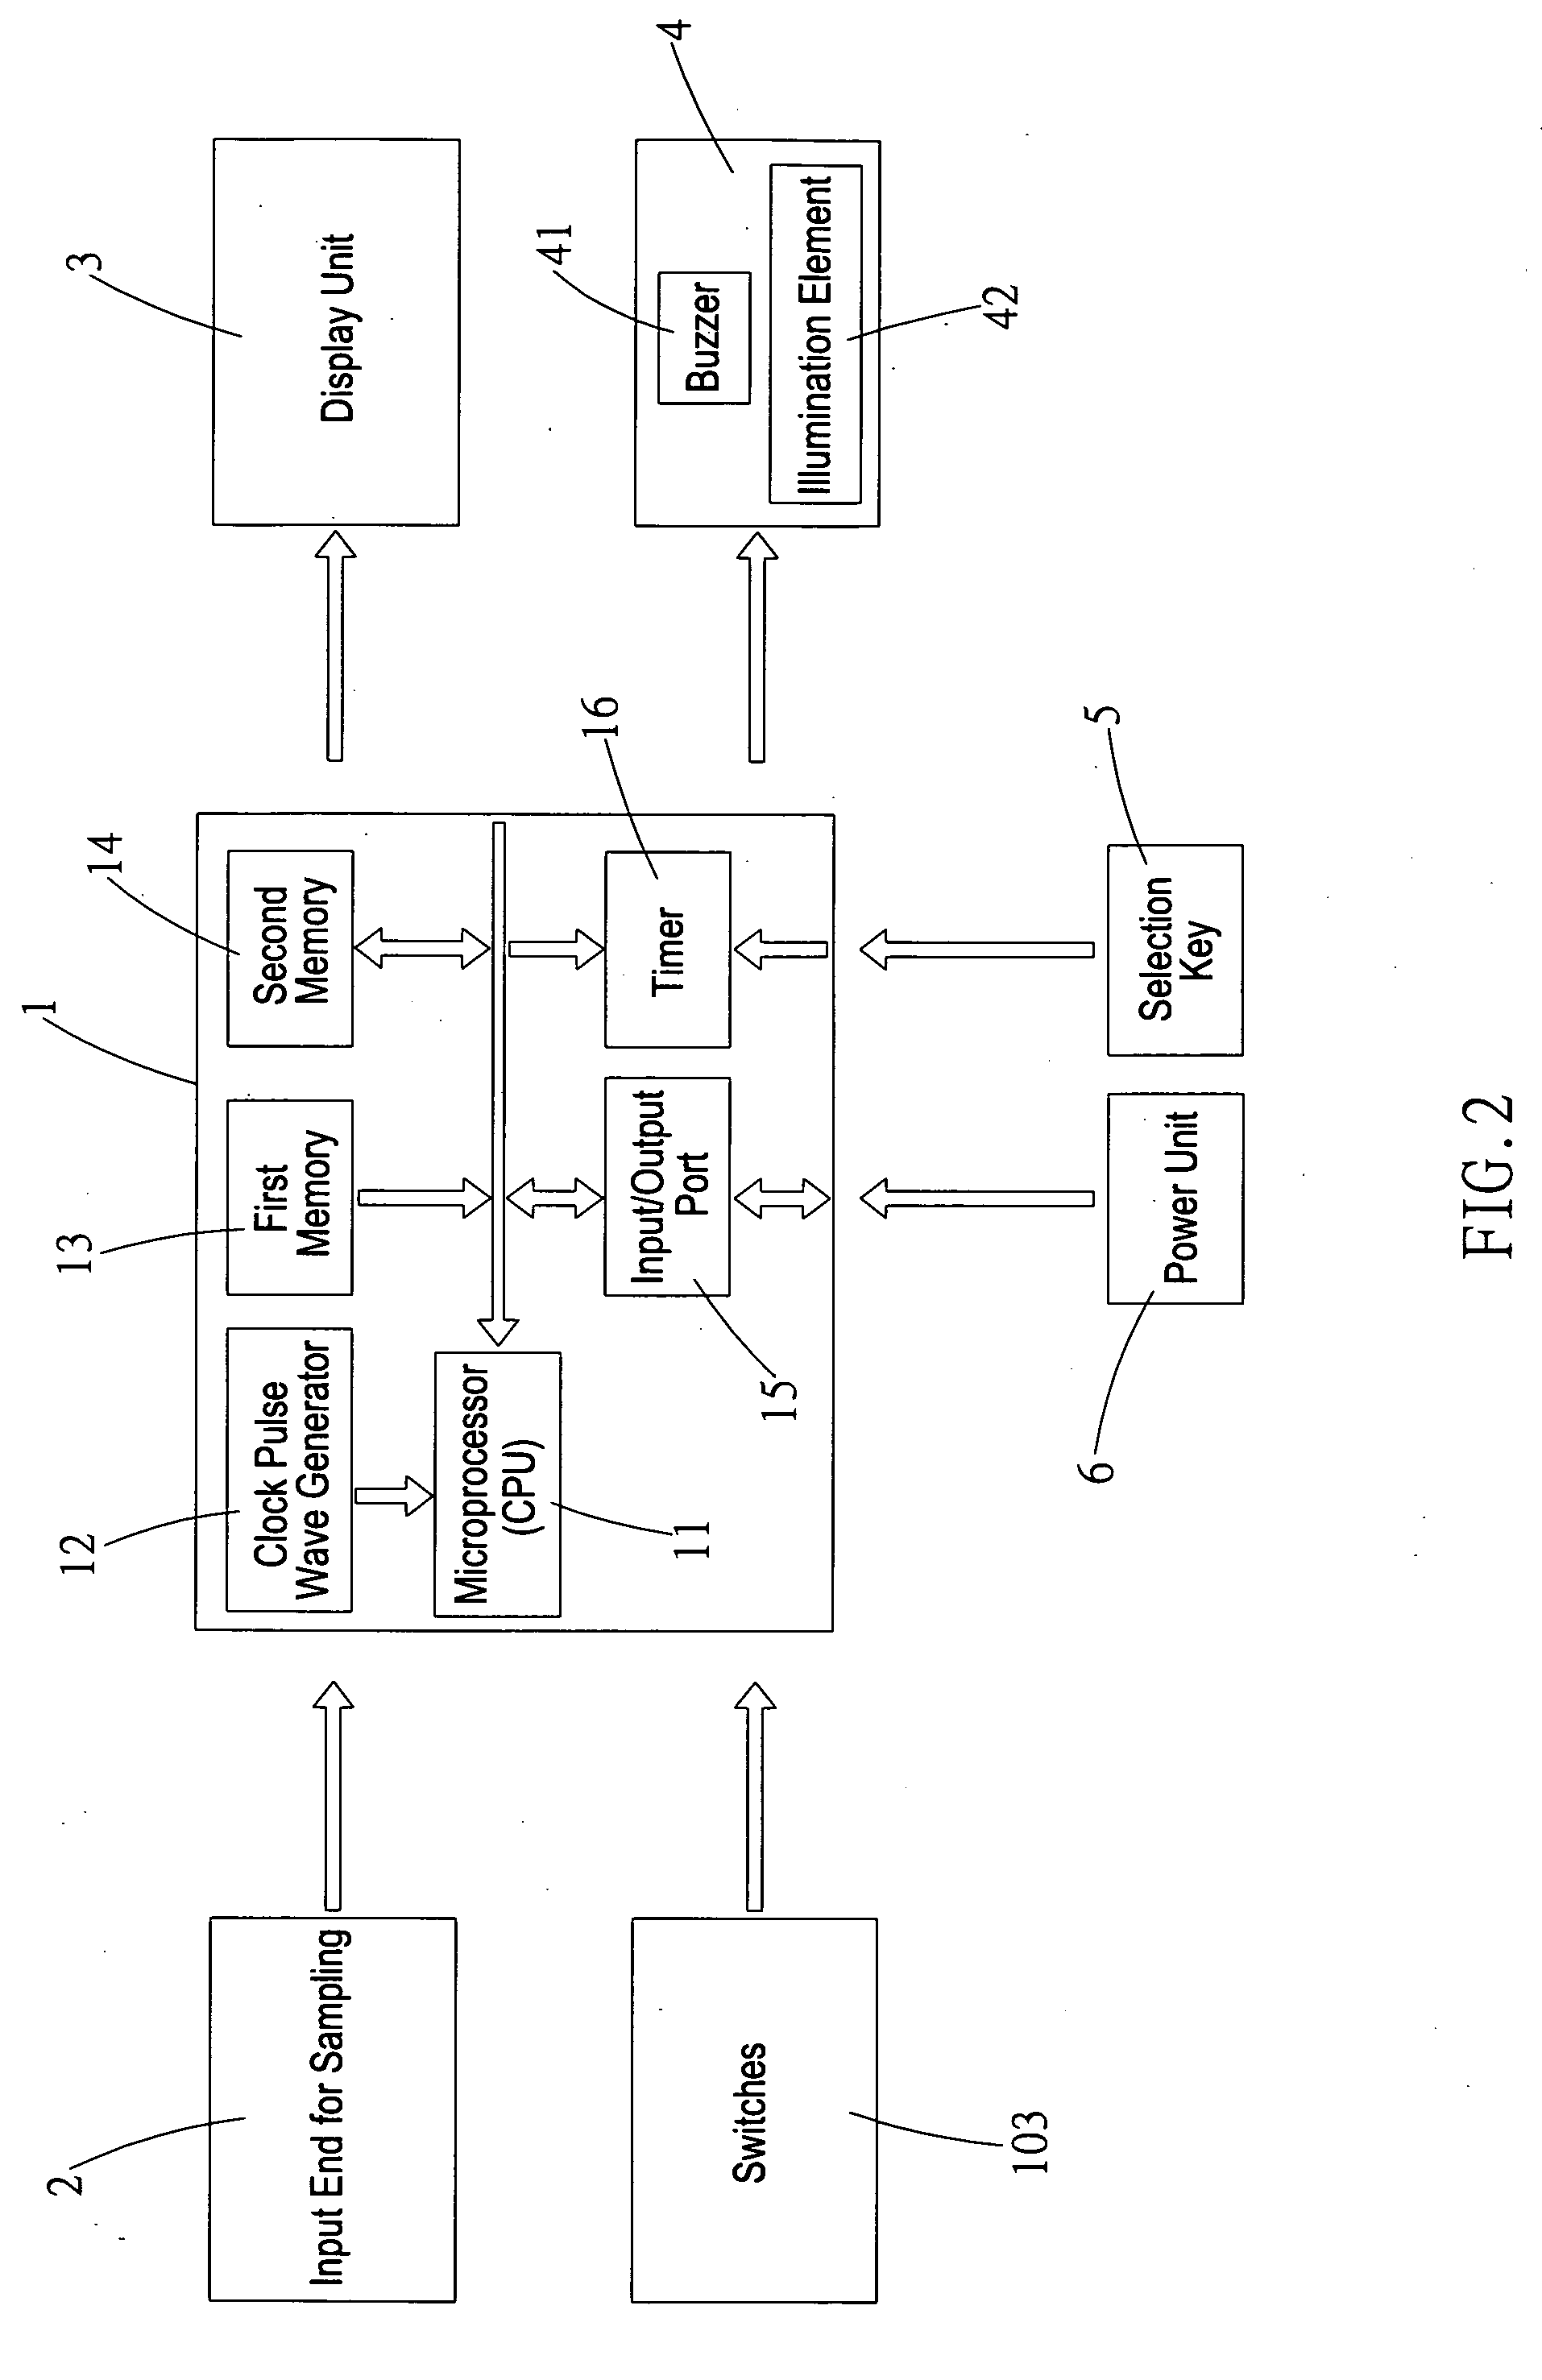 Protection device and a method that detect electricity